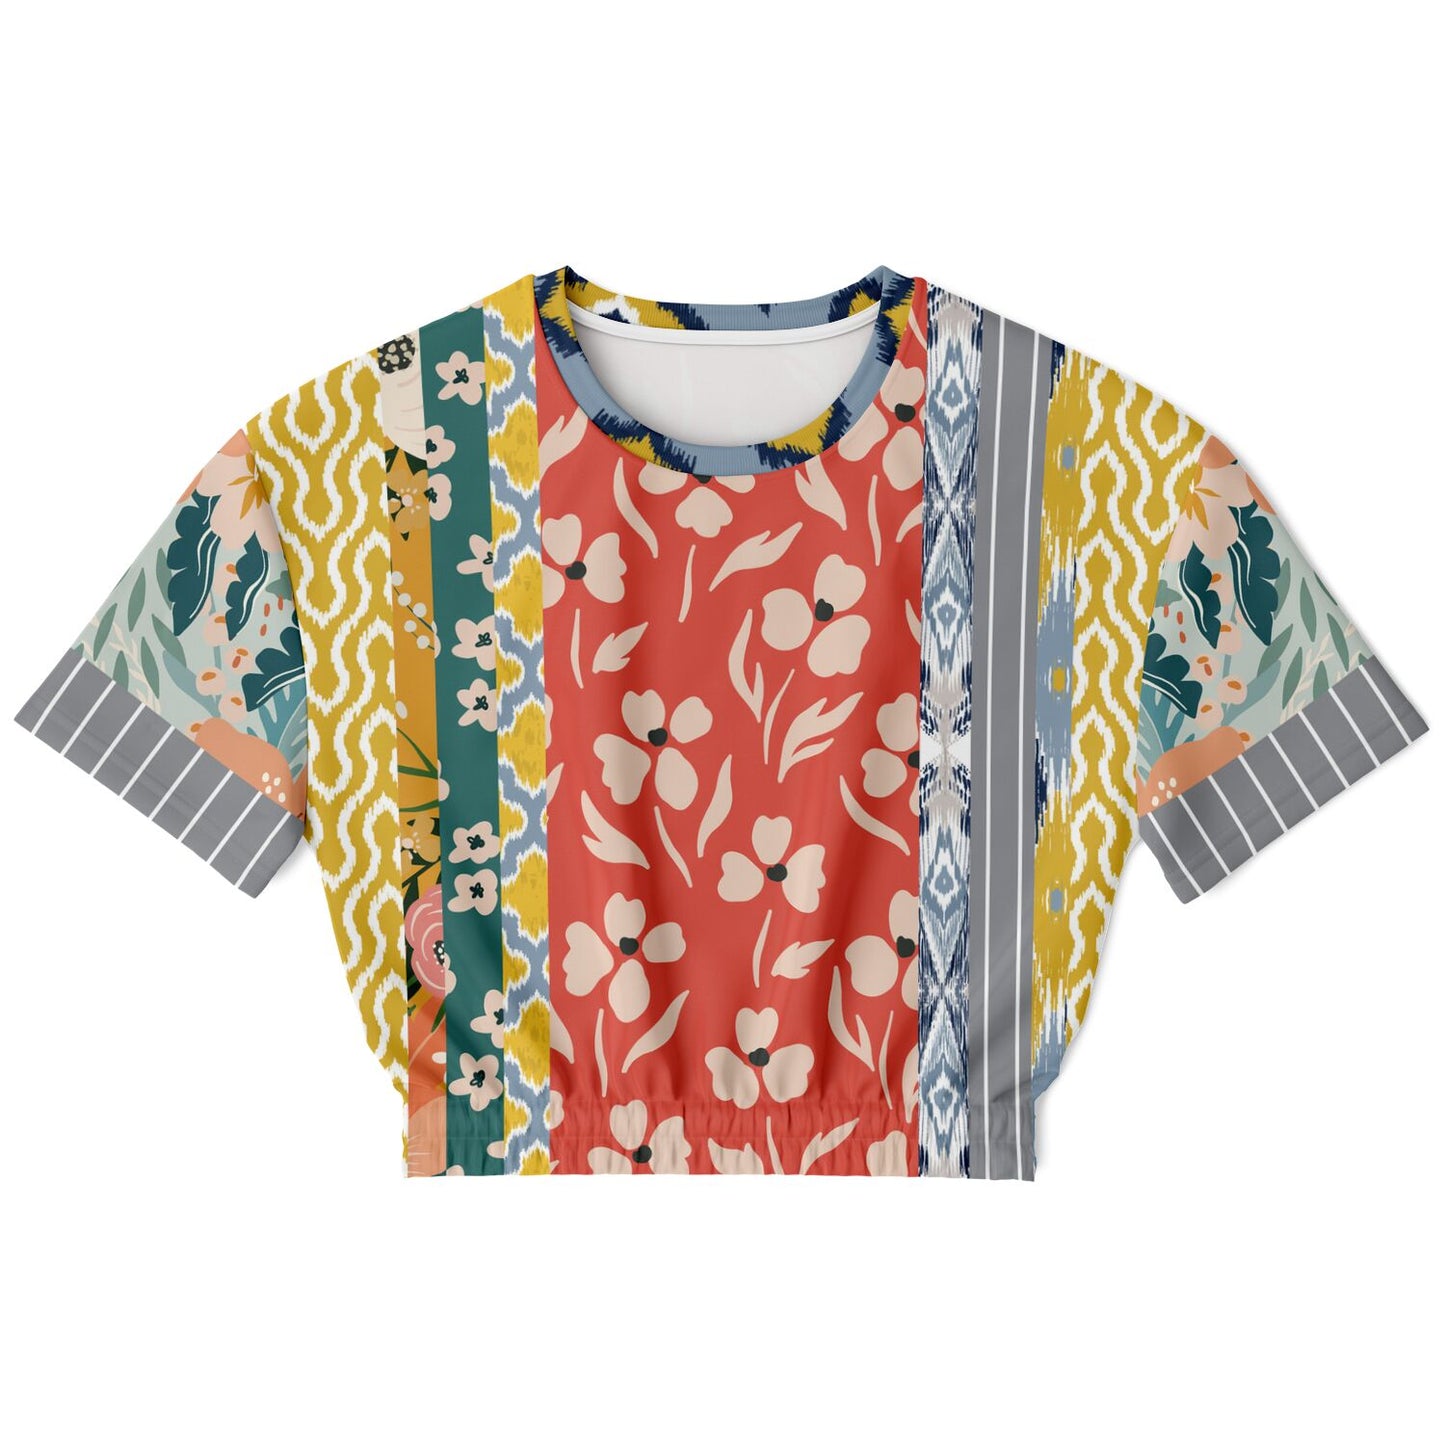 Tallulah Bankhead Yellow Patchwork Short Sleeve Cropped Sweater